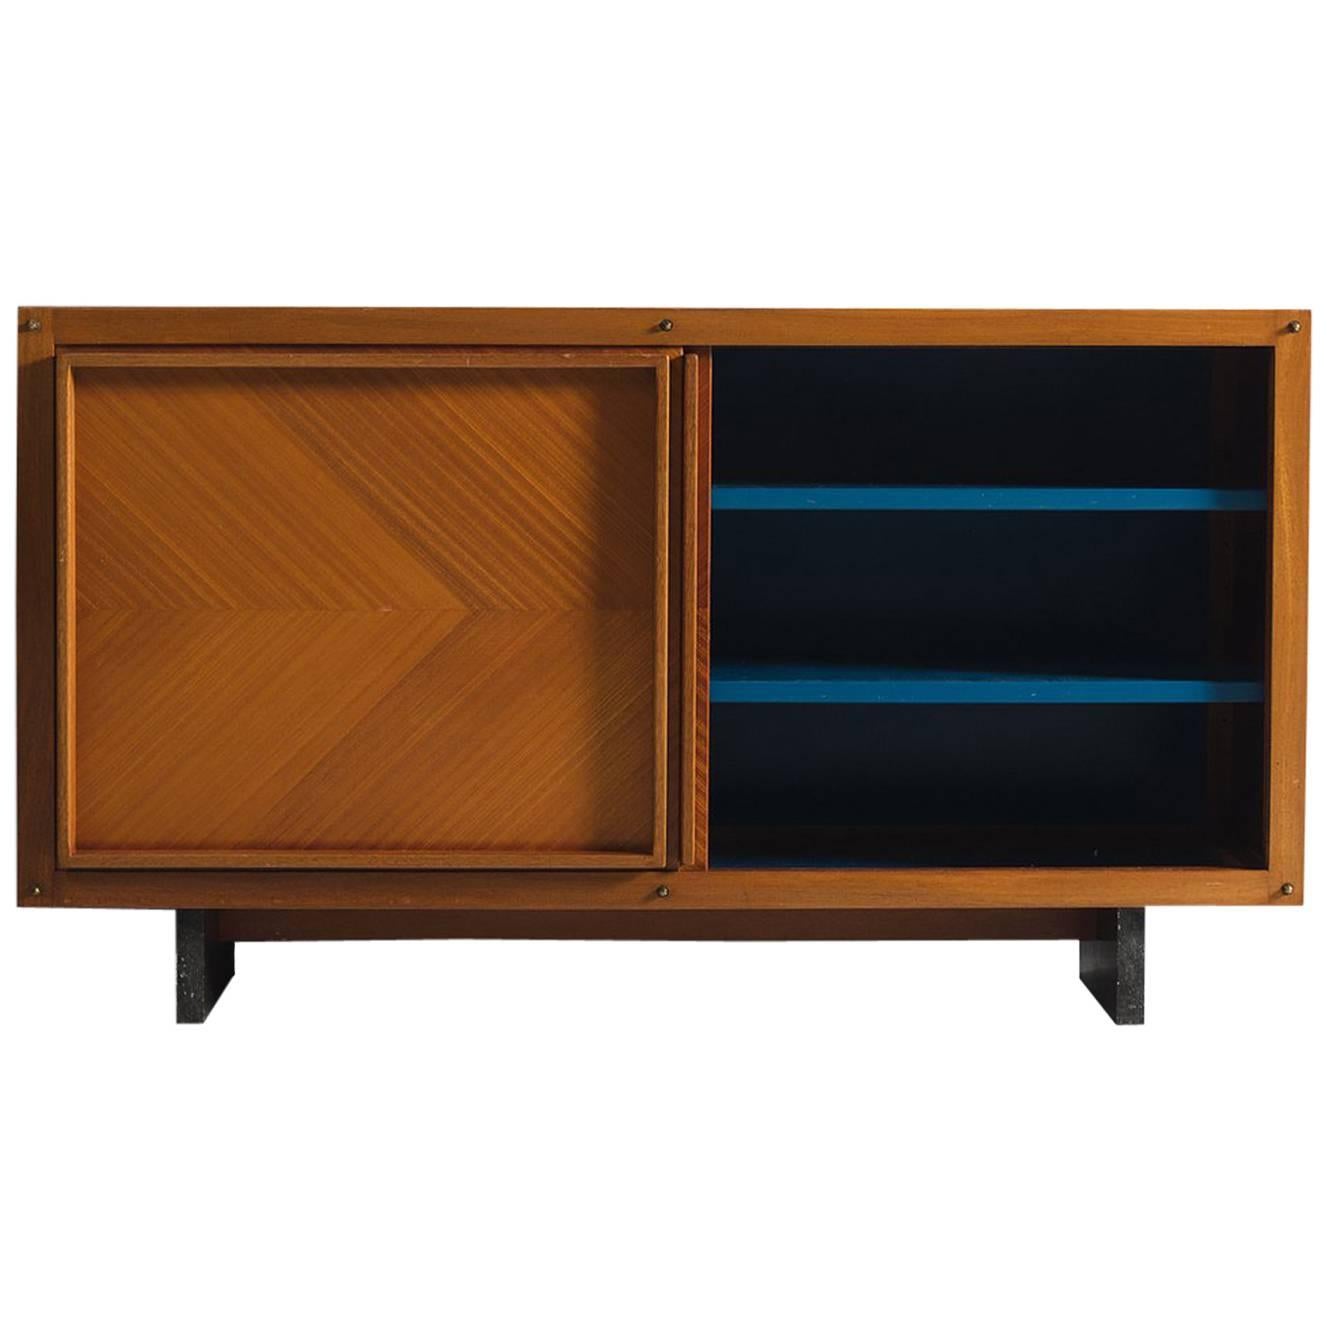 Andre Sornay Early Mahogany Cabinet with Blue Interior